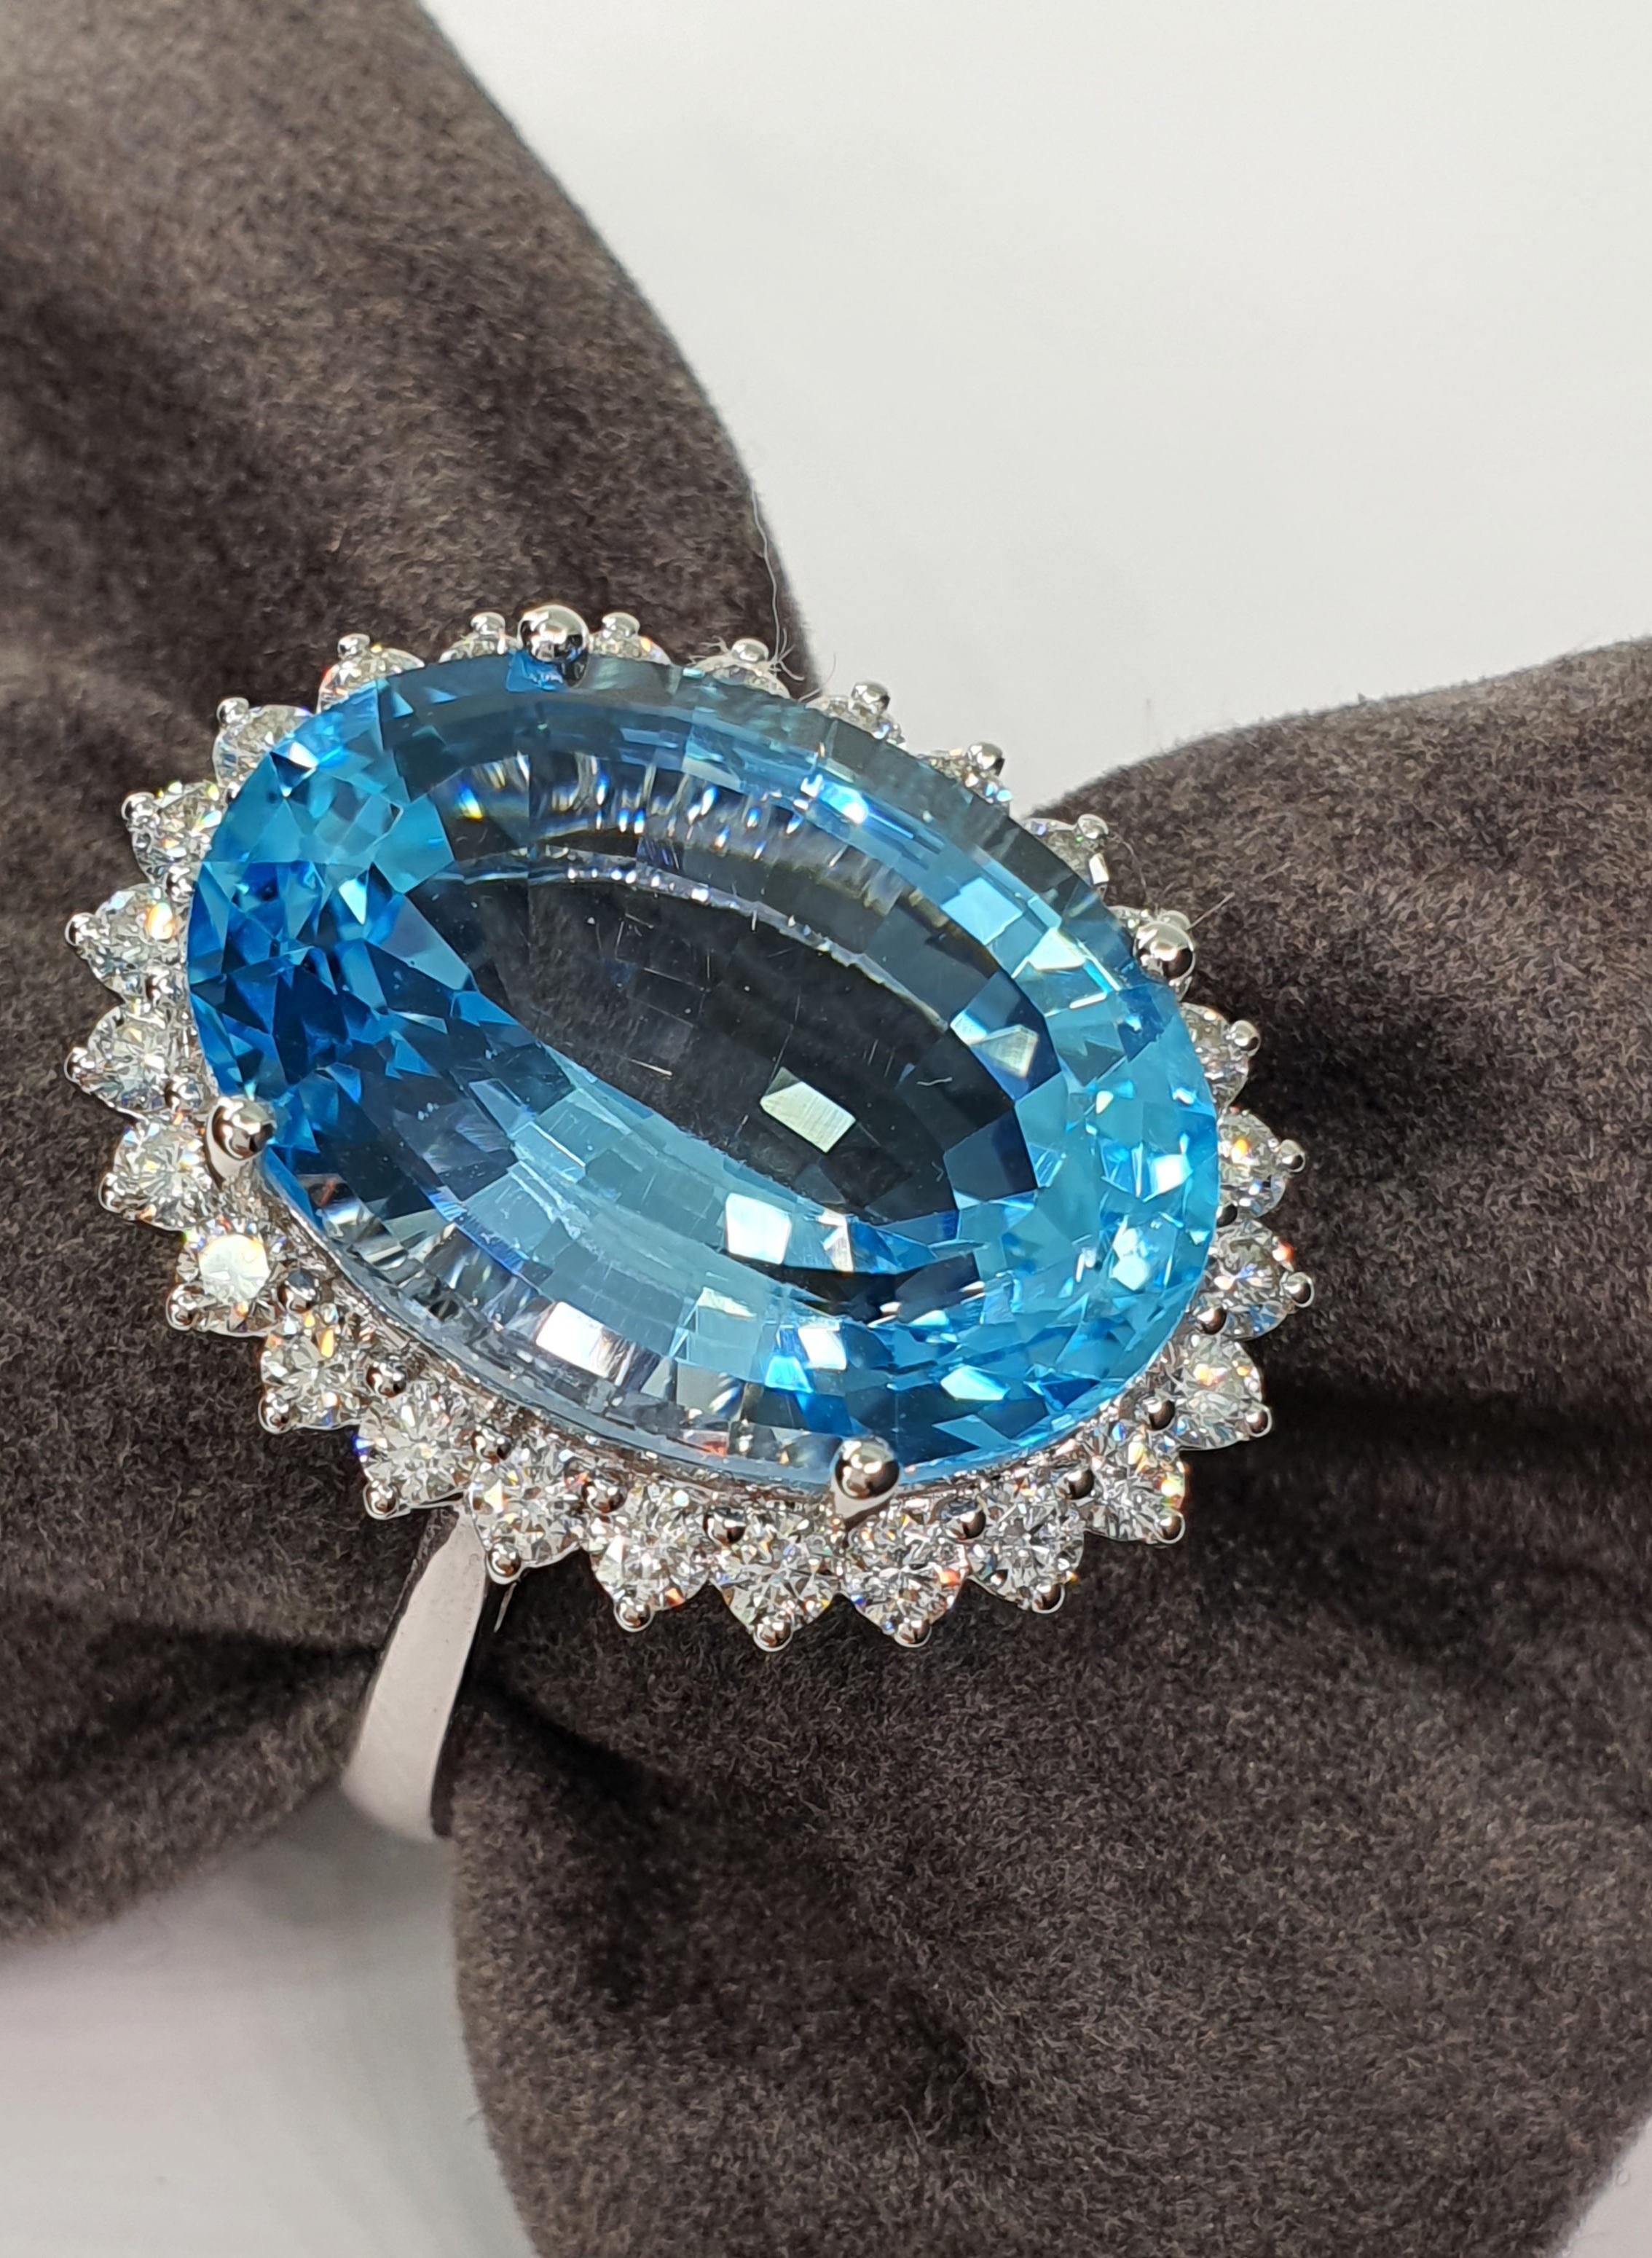 This 27.47 ctw Blue Topaz Diamond White Gold Ring is an amazing site to see! 
The gemstone cut and deep sky blue color is absolutely gorgeous!
The size and brilliance of this blue Topaz is just breathtaking ! 
There is an edge of diamonds all around